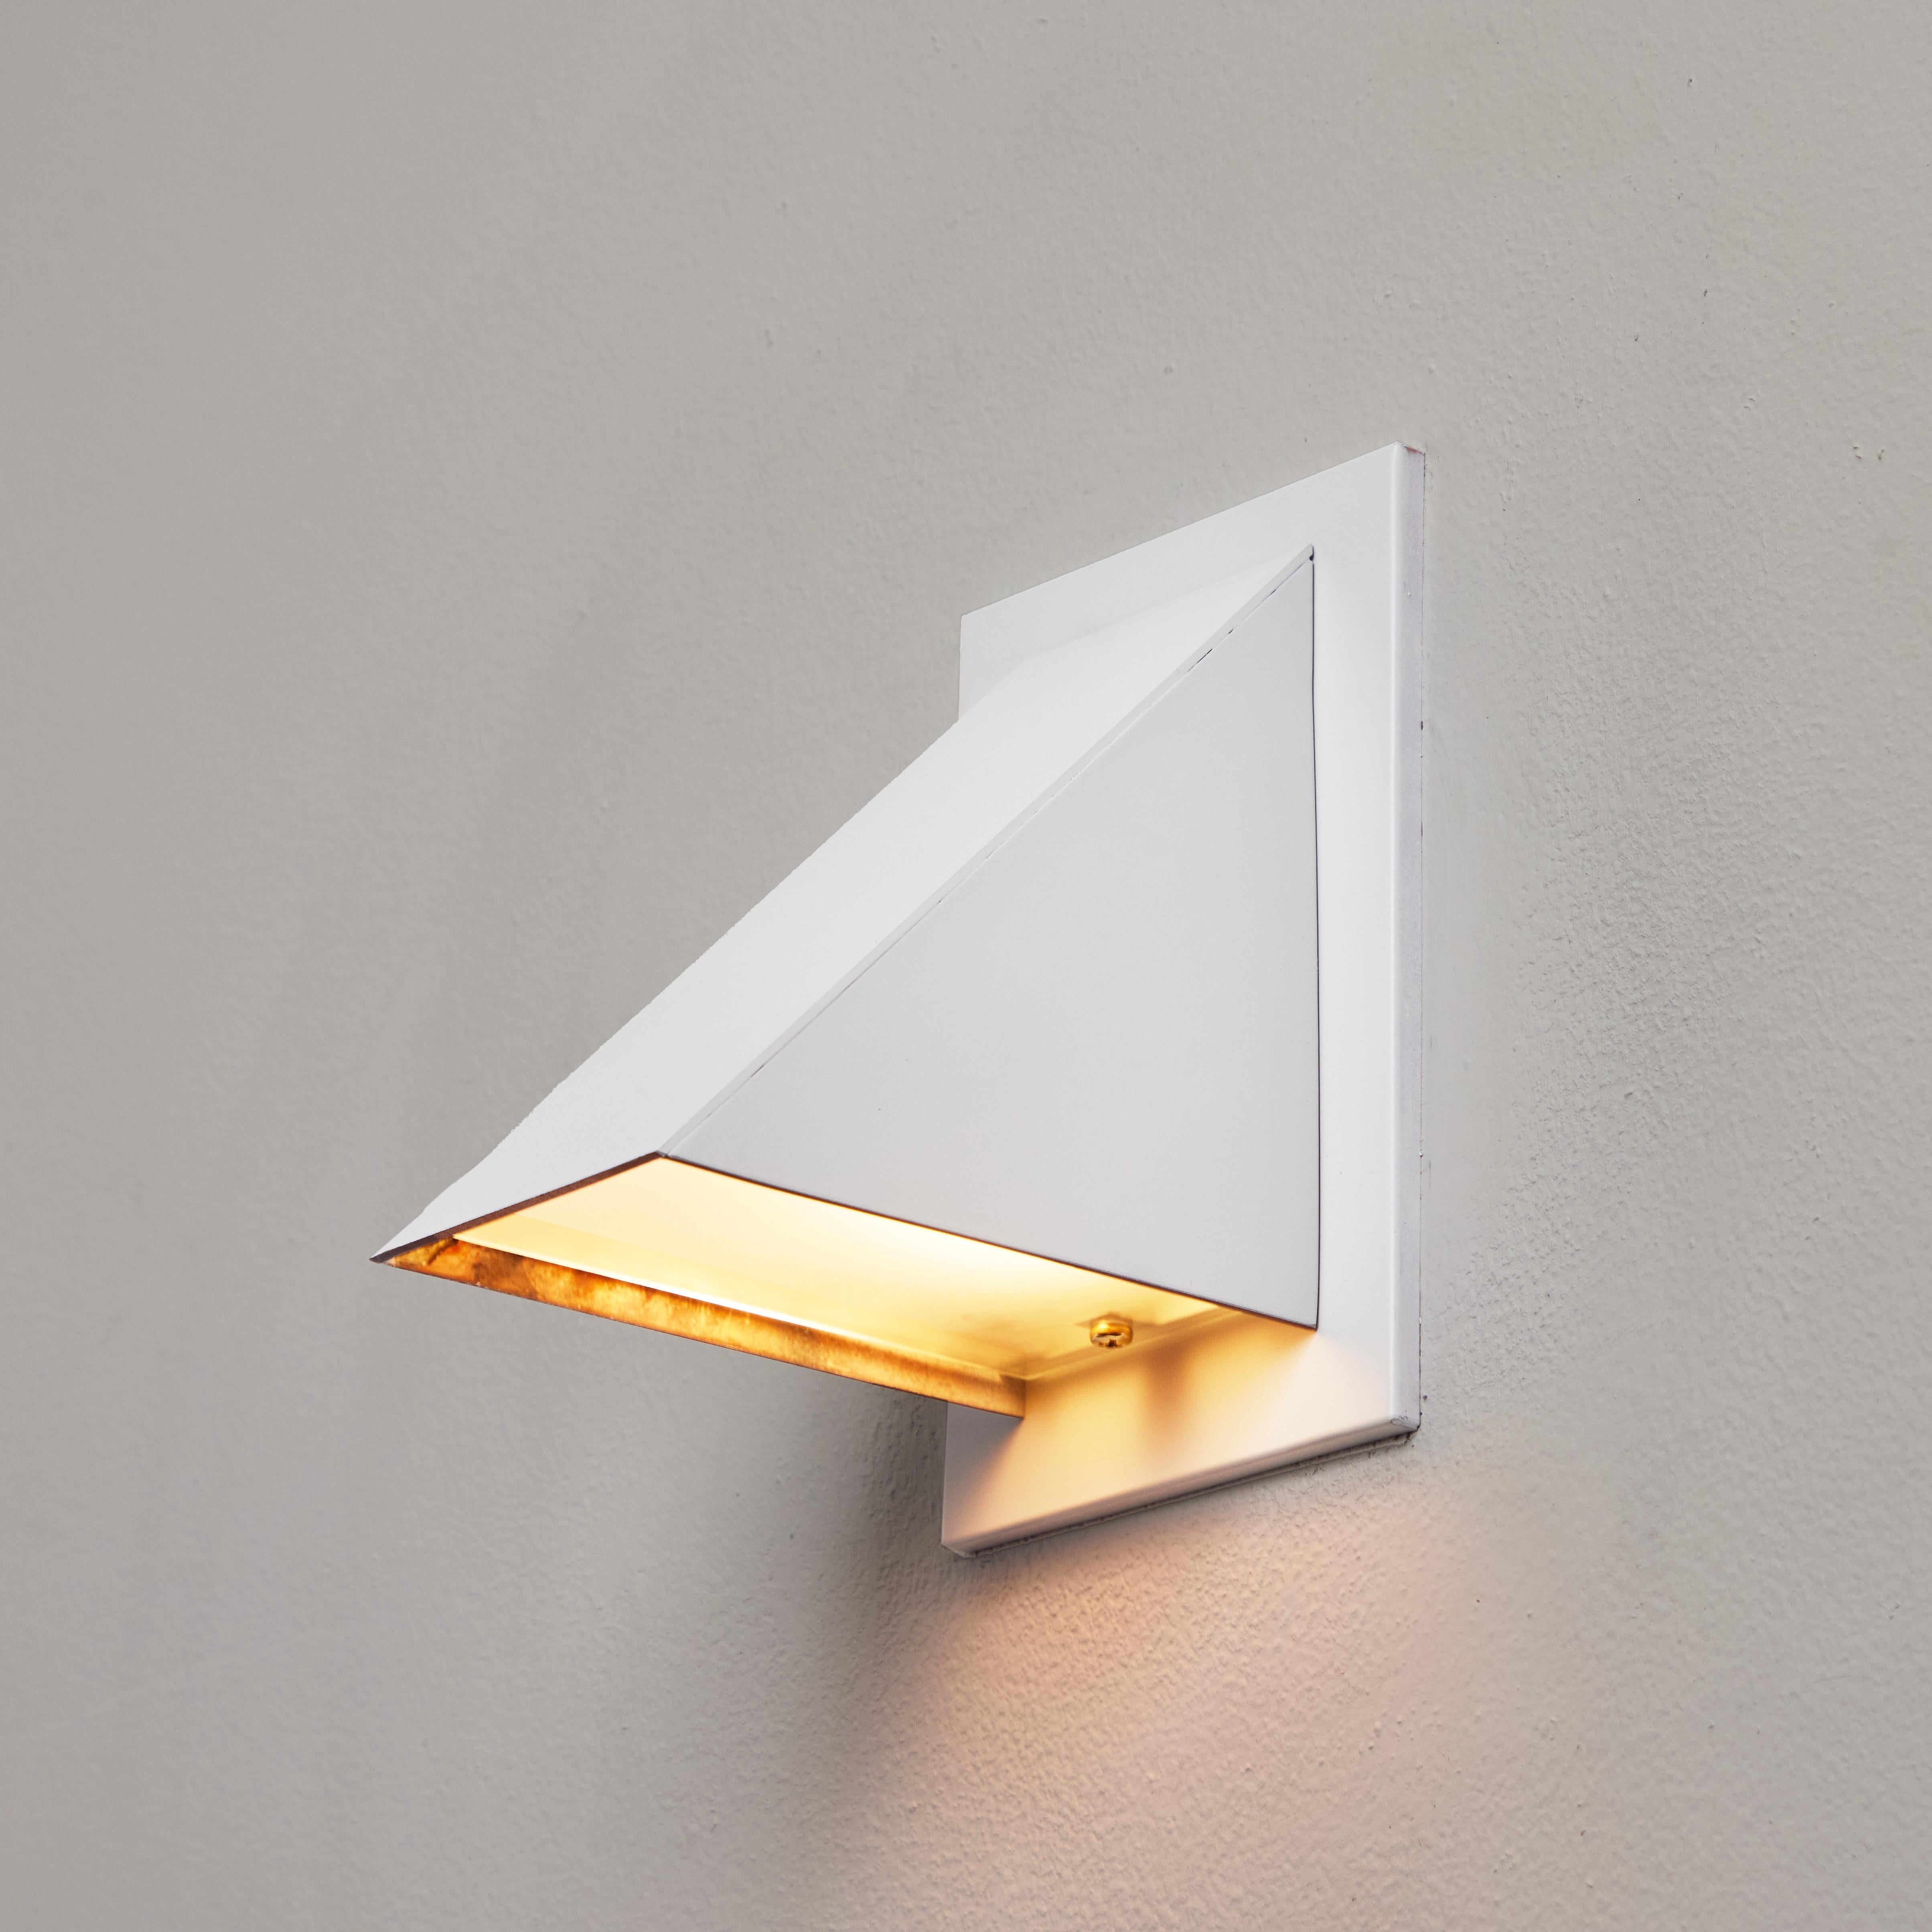 Jonas Bohlin 'Oxid' Wall Light for Örsjö in White. Executed in white painted metal with an opaline glass diffuser. An incredibly refined and clean geometric design that is quintessentially Scandinavian. For indoor or outdoor use.

Price is per item.